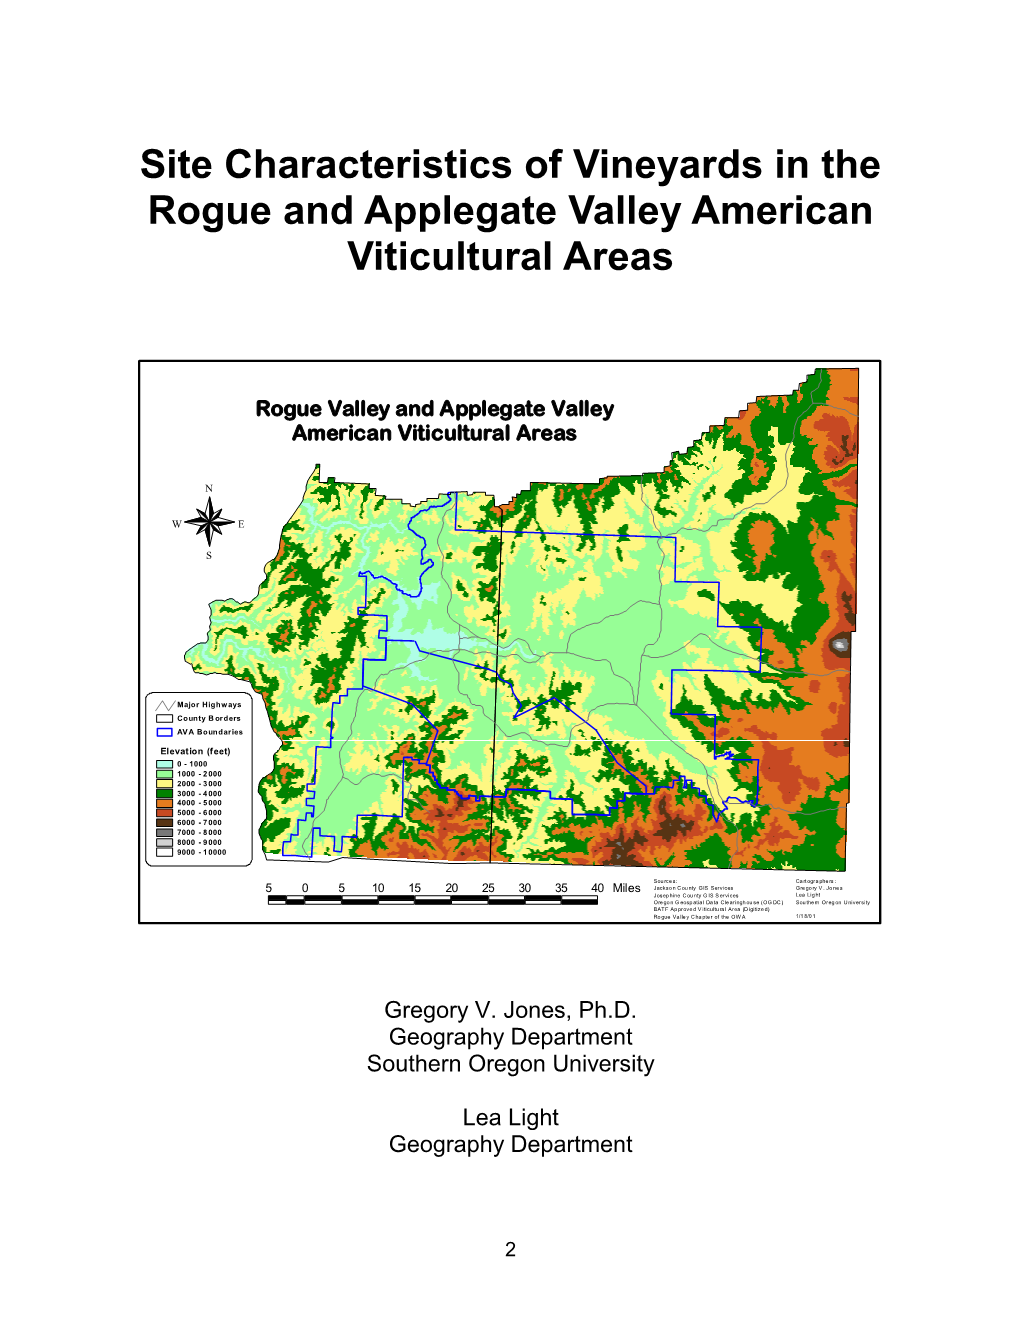 Site Characteristics of Vineyards in the Rogue and Applegate Valley American Viticultural Areas